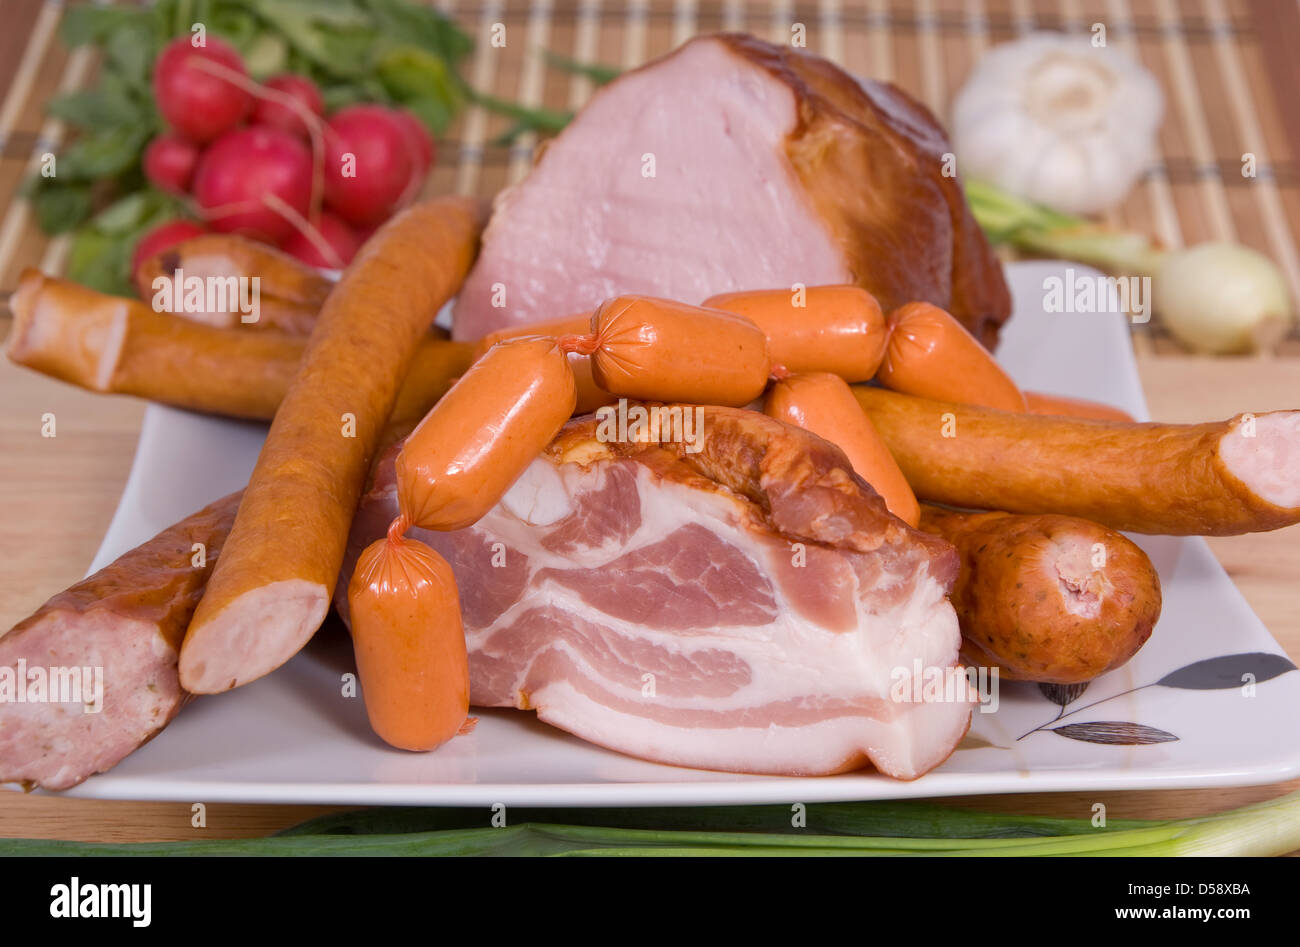 different species of hams and sausage on plate Stock Photo